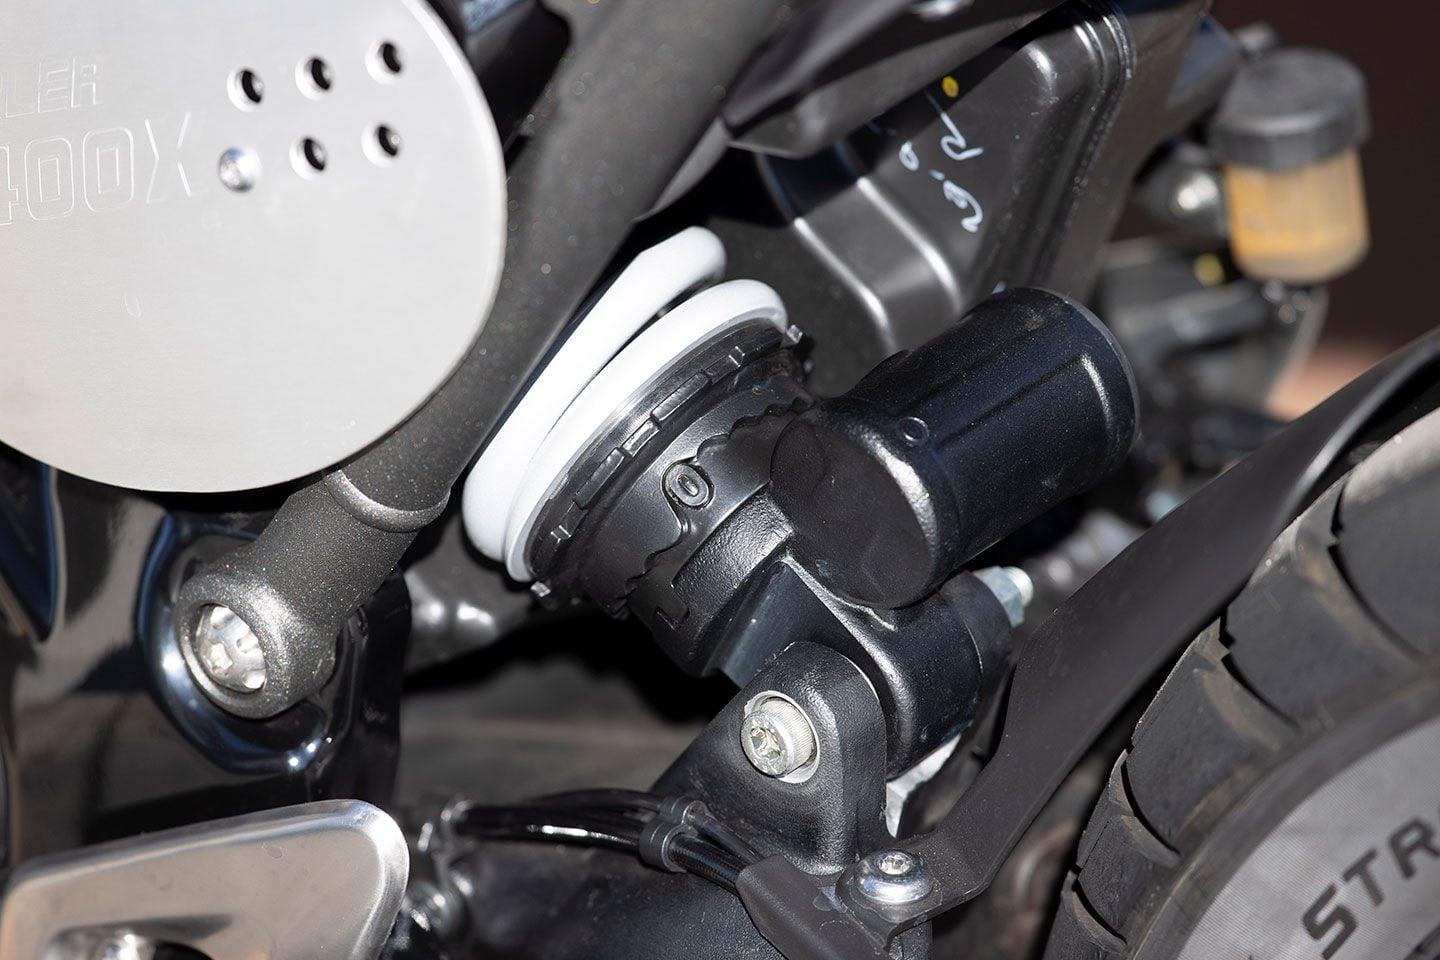 A stepped preload collar is the only suspension adjustment available on the Speed 400 and Scrambler 400 X.